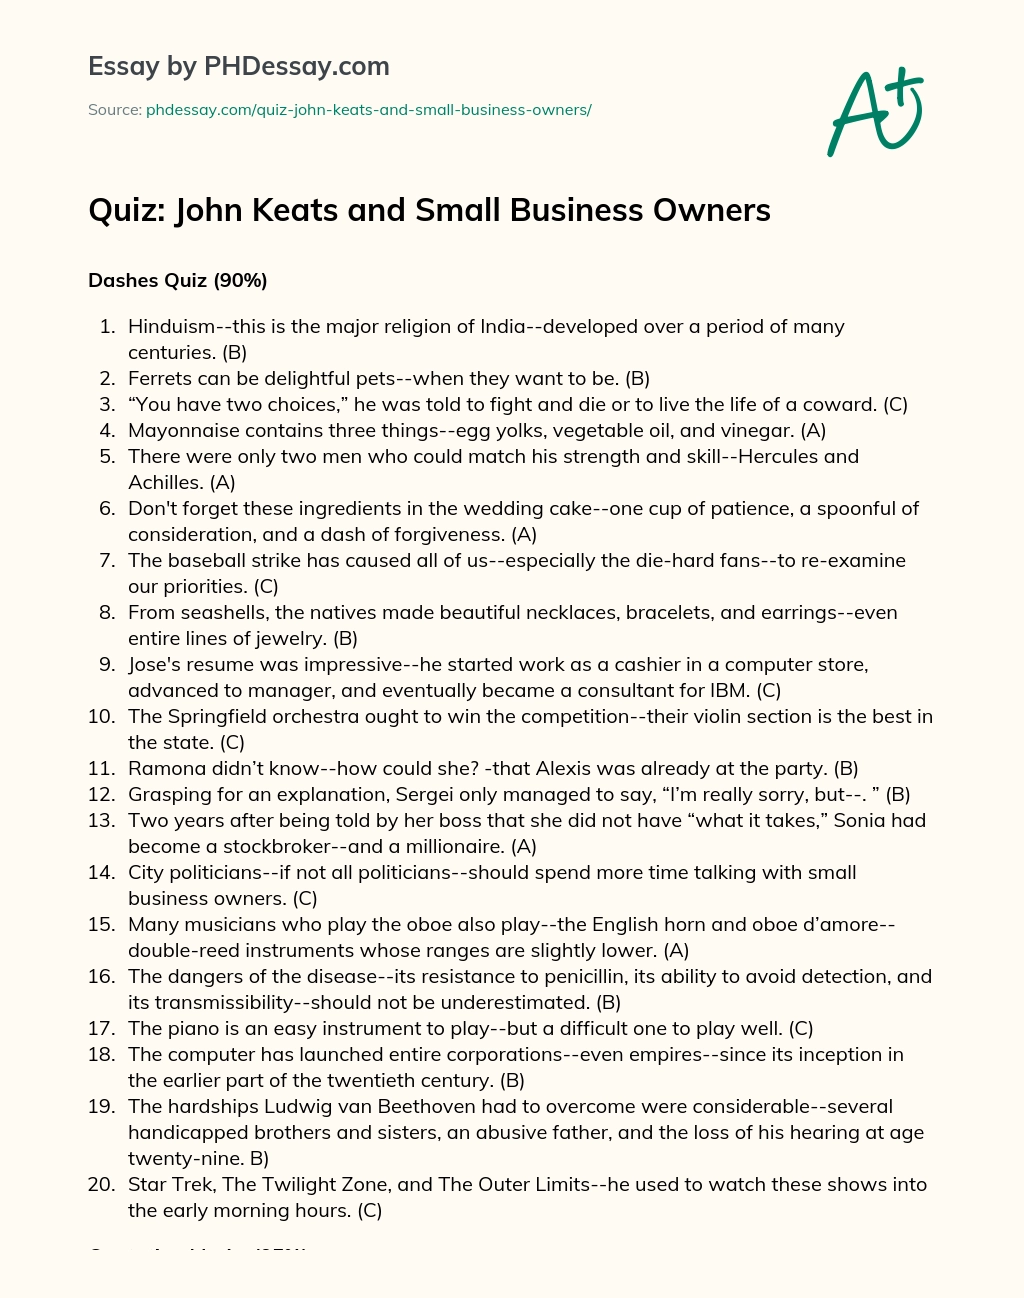 Quiz: John Keats and Small Business Owners essay